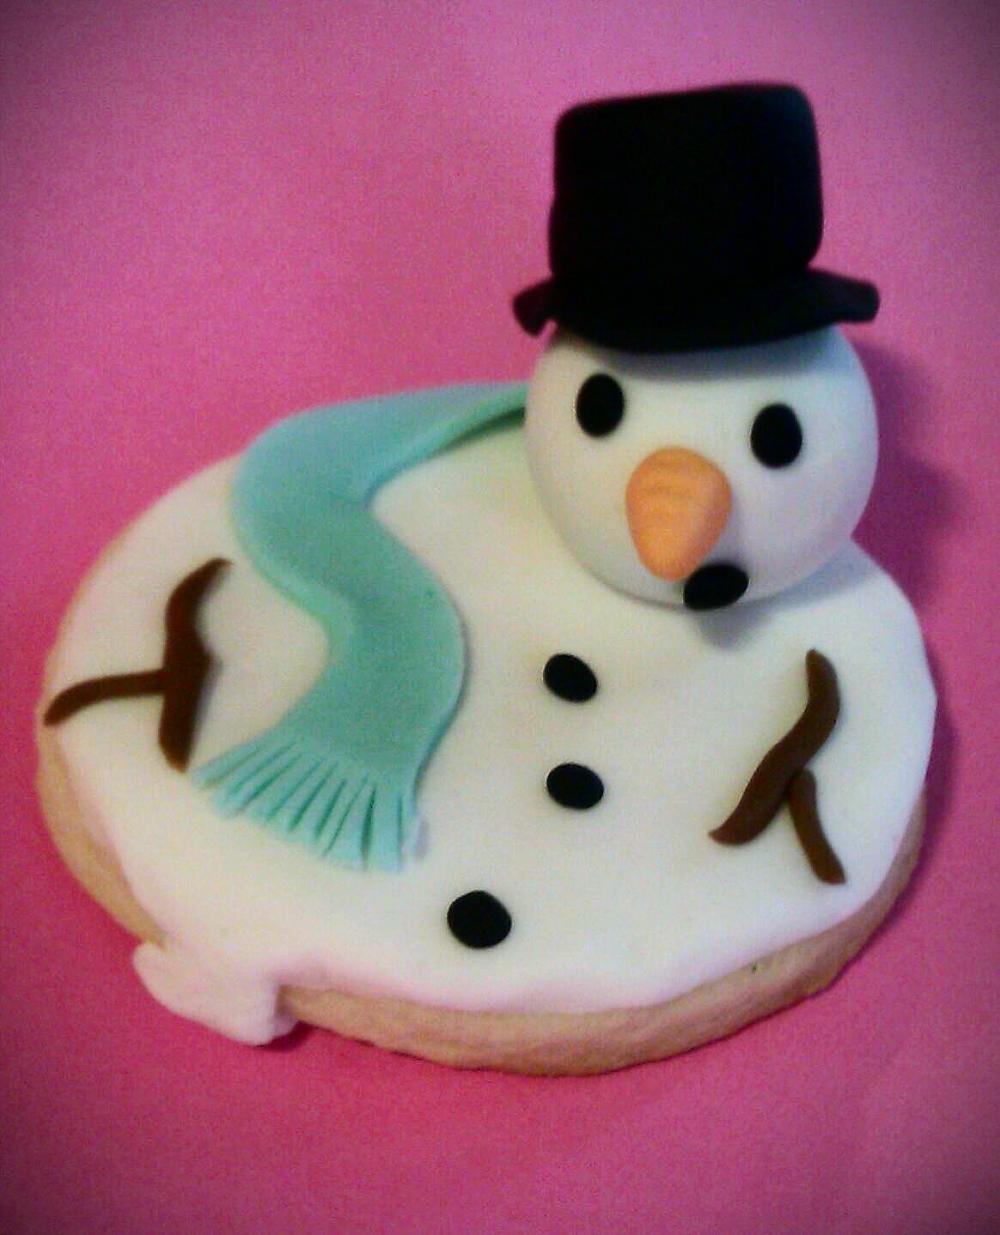 12 Melted Snowman Decorated Sugar Cookies